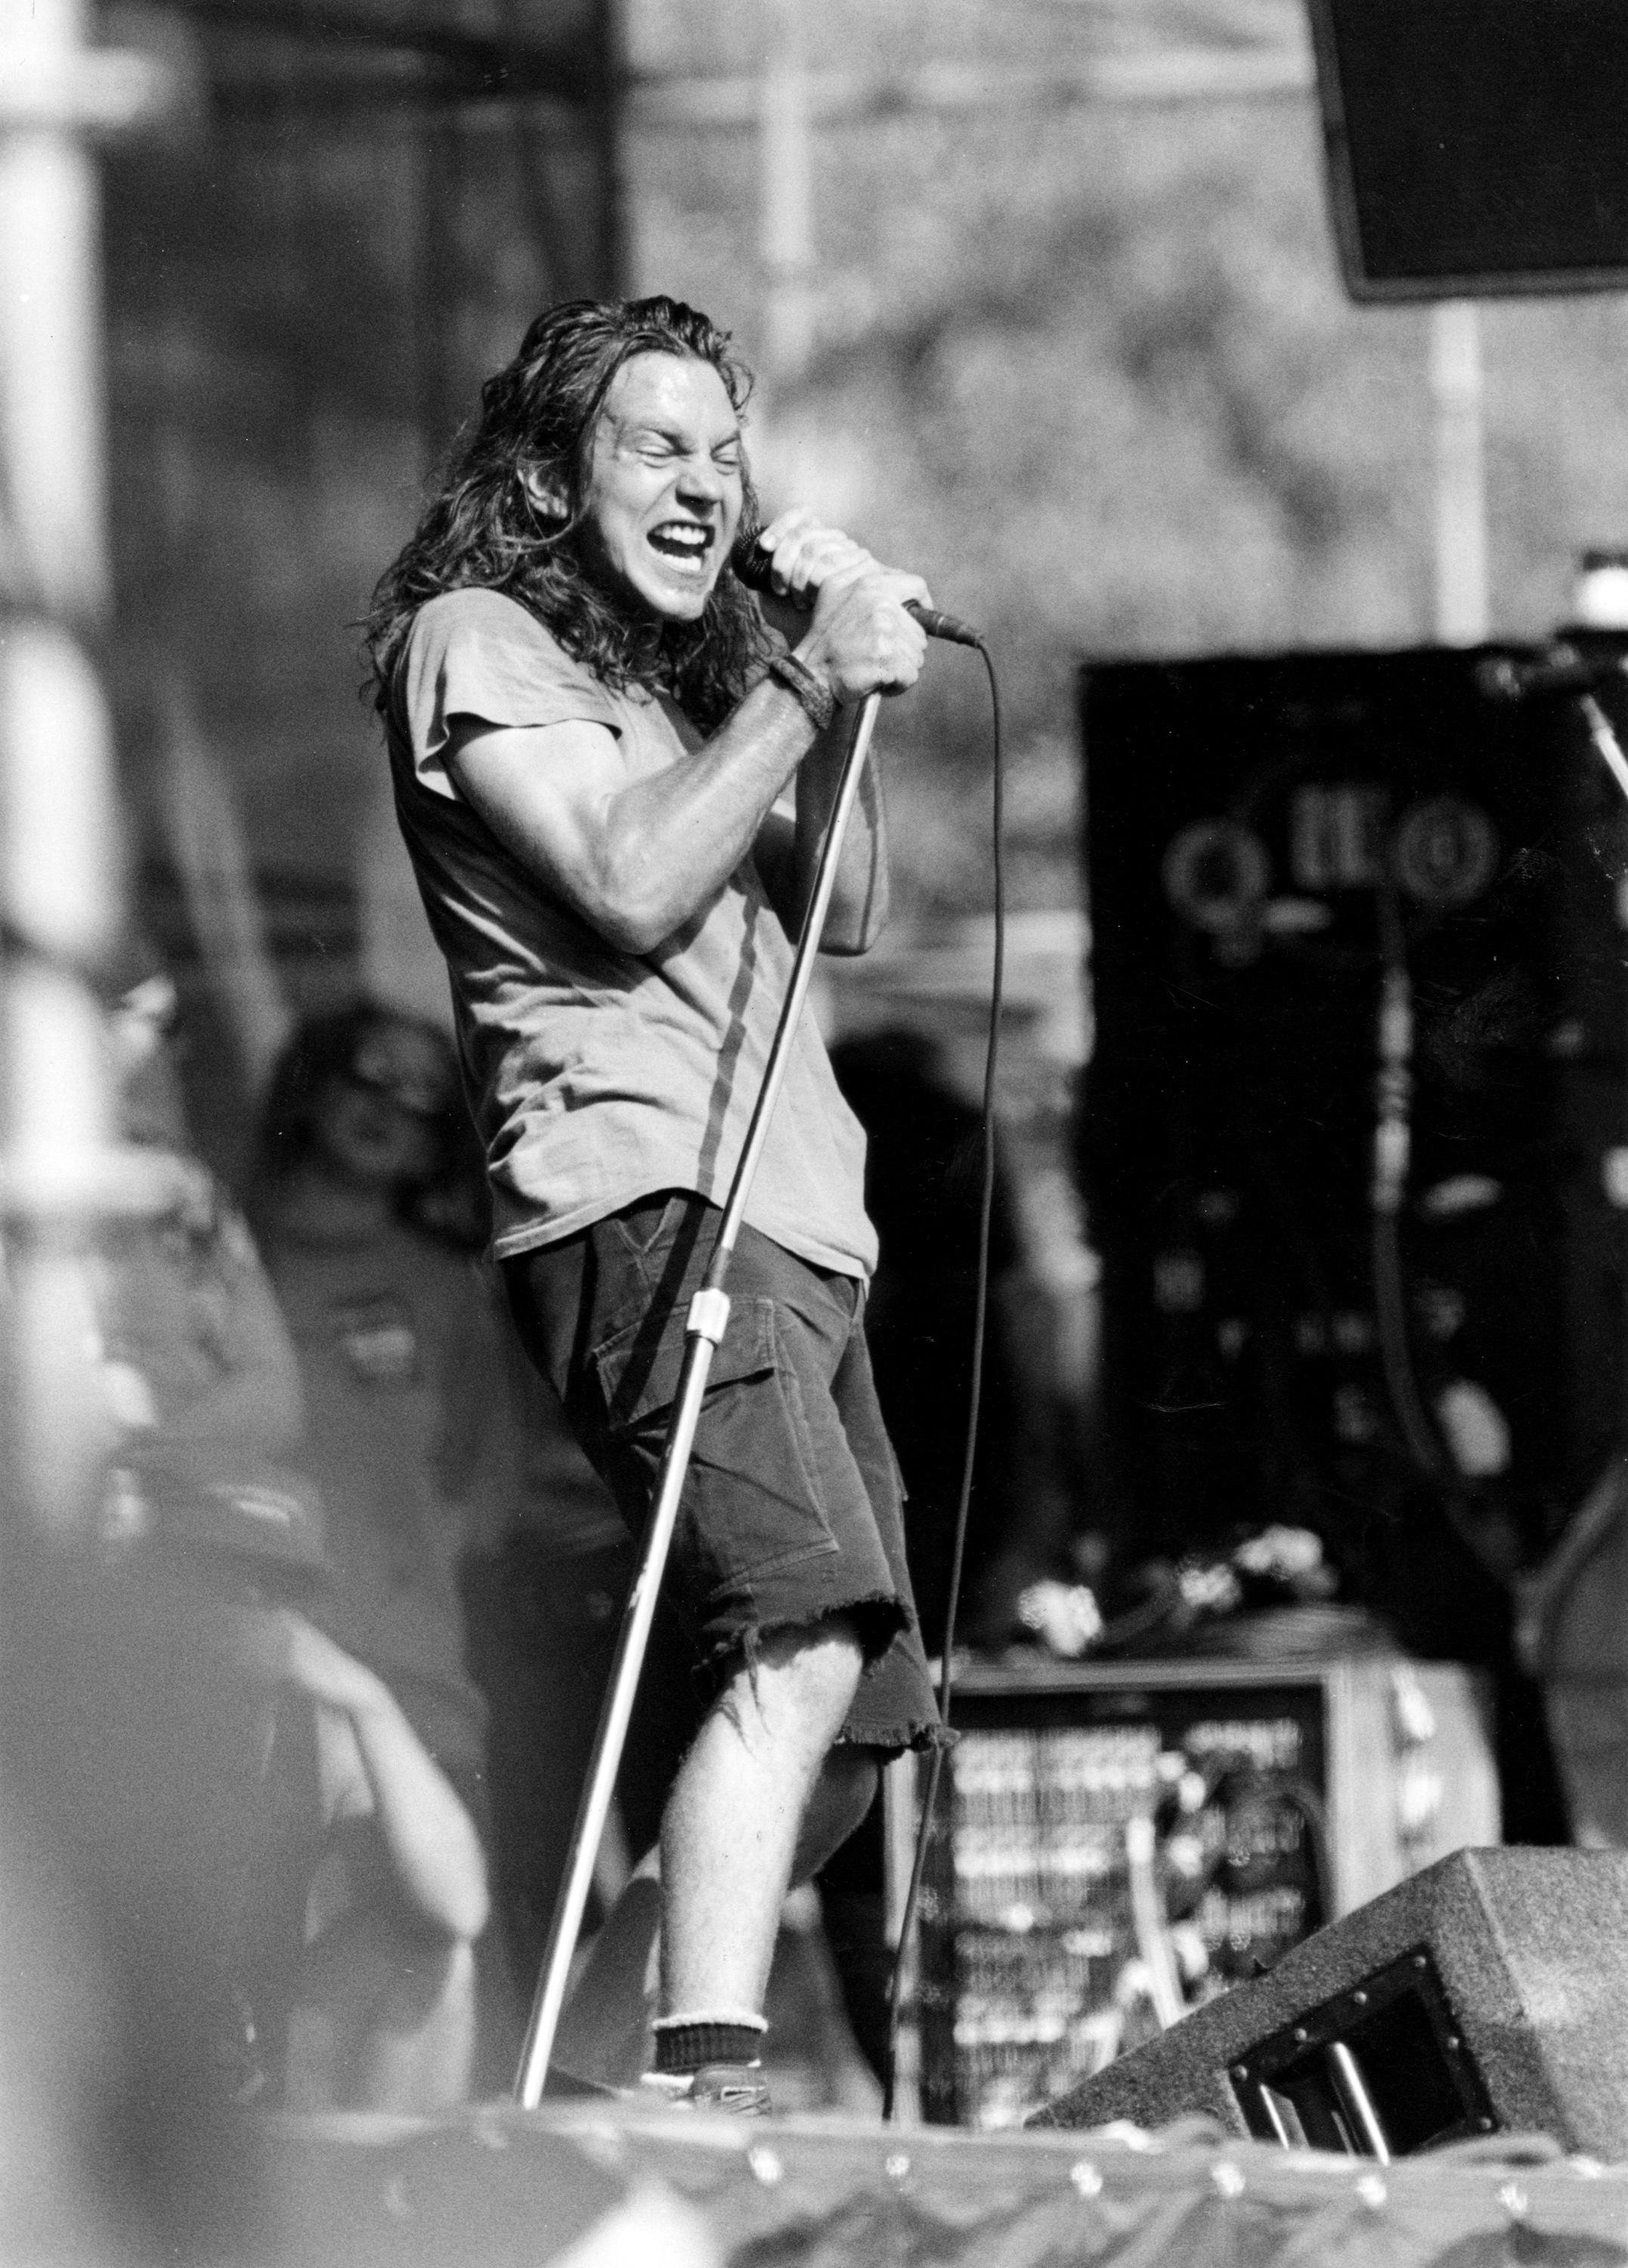 music pearl jam grayscale 2154x3000 wallpaper High Quality